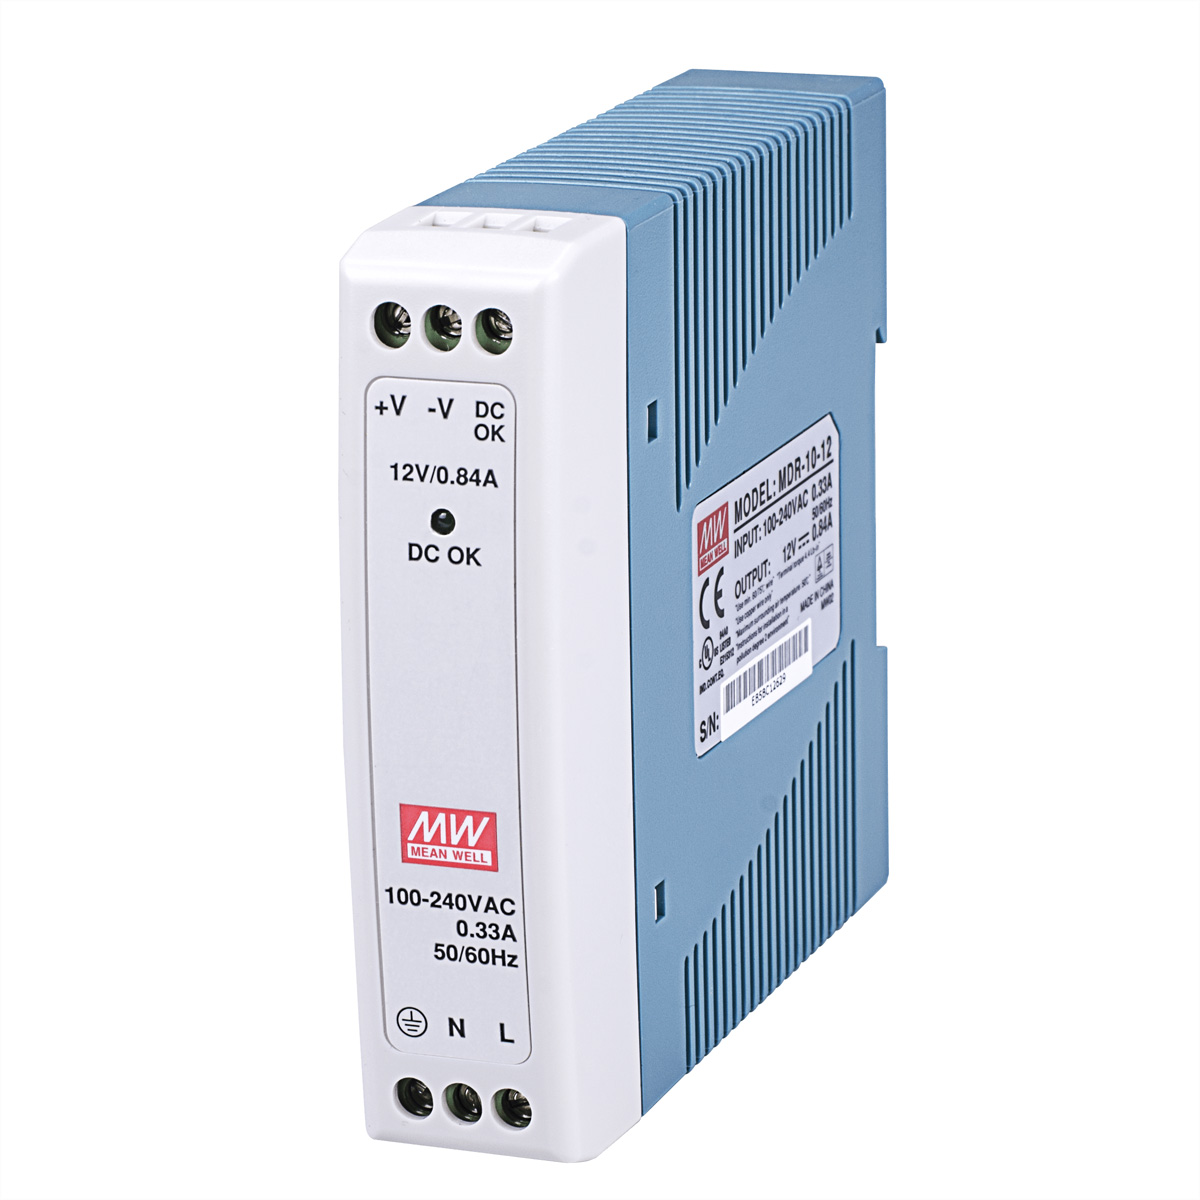 MEAN WELL MDR-10-12 Industrie DIN-Rail Netzteil, 12VDC/10W